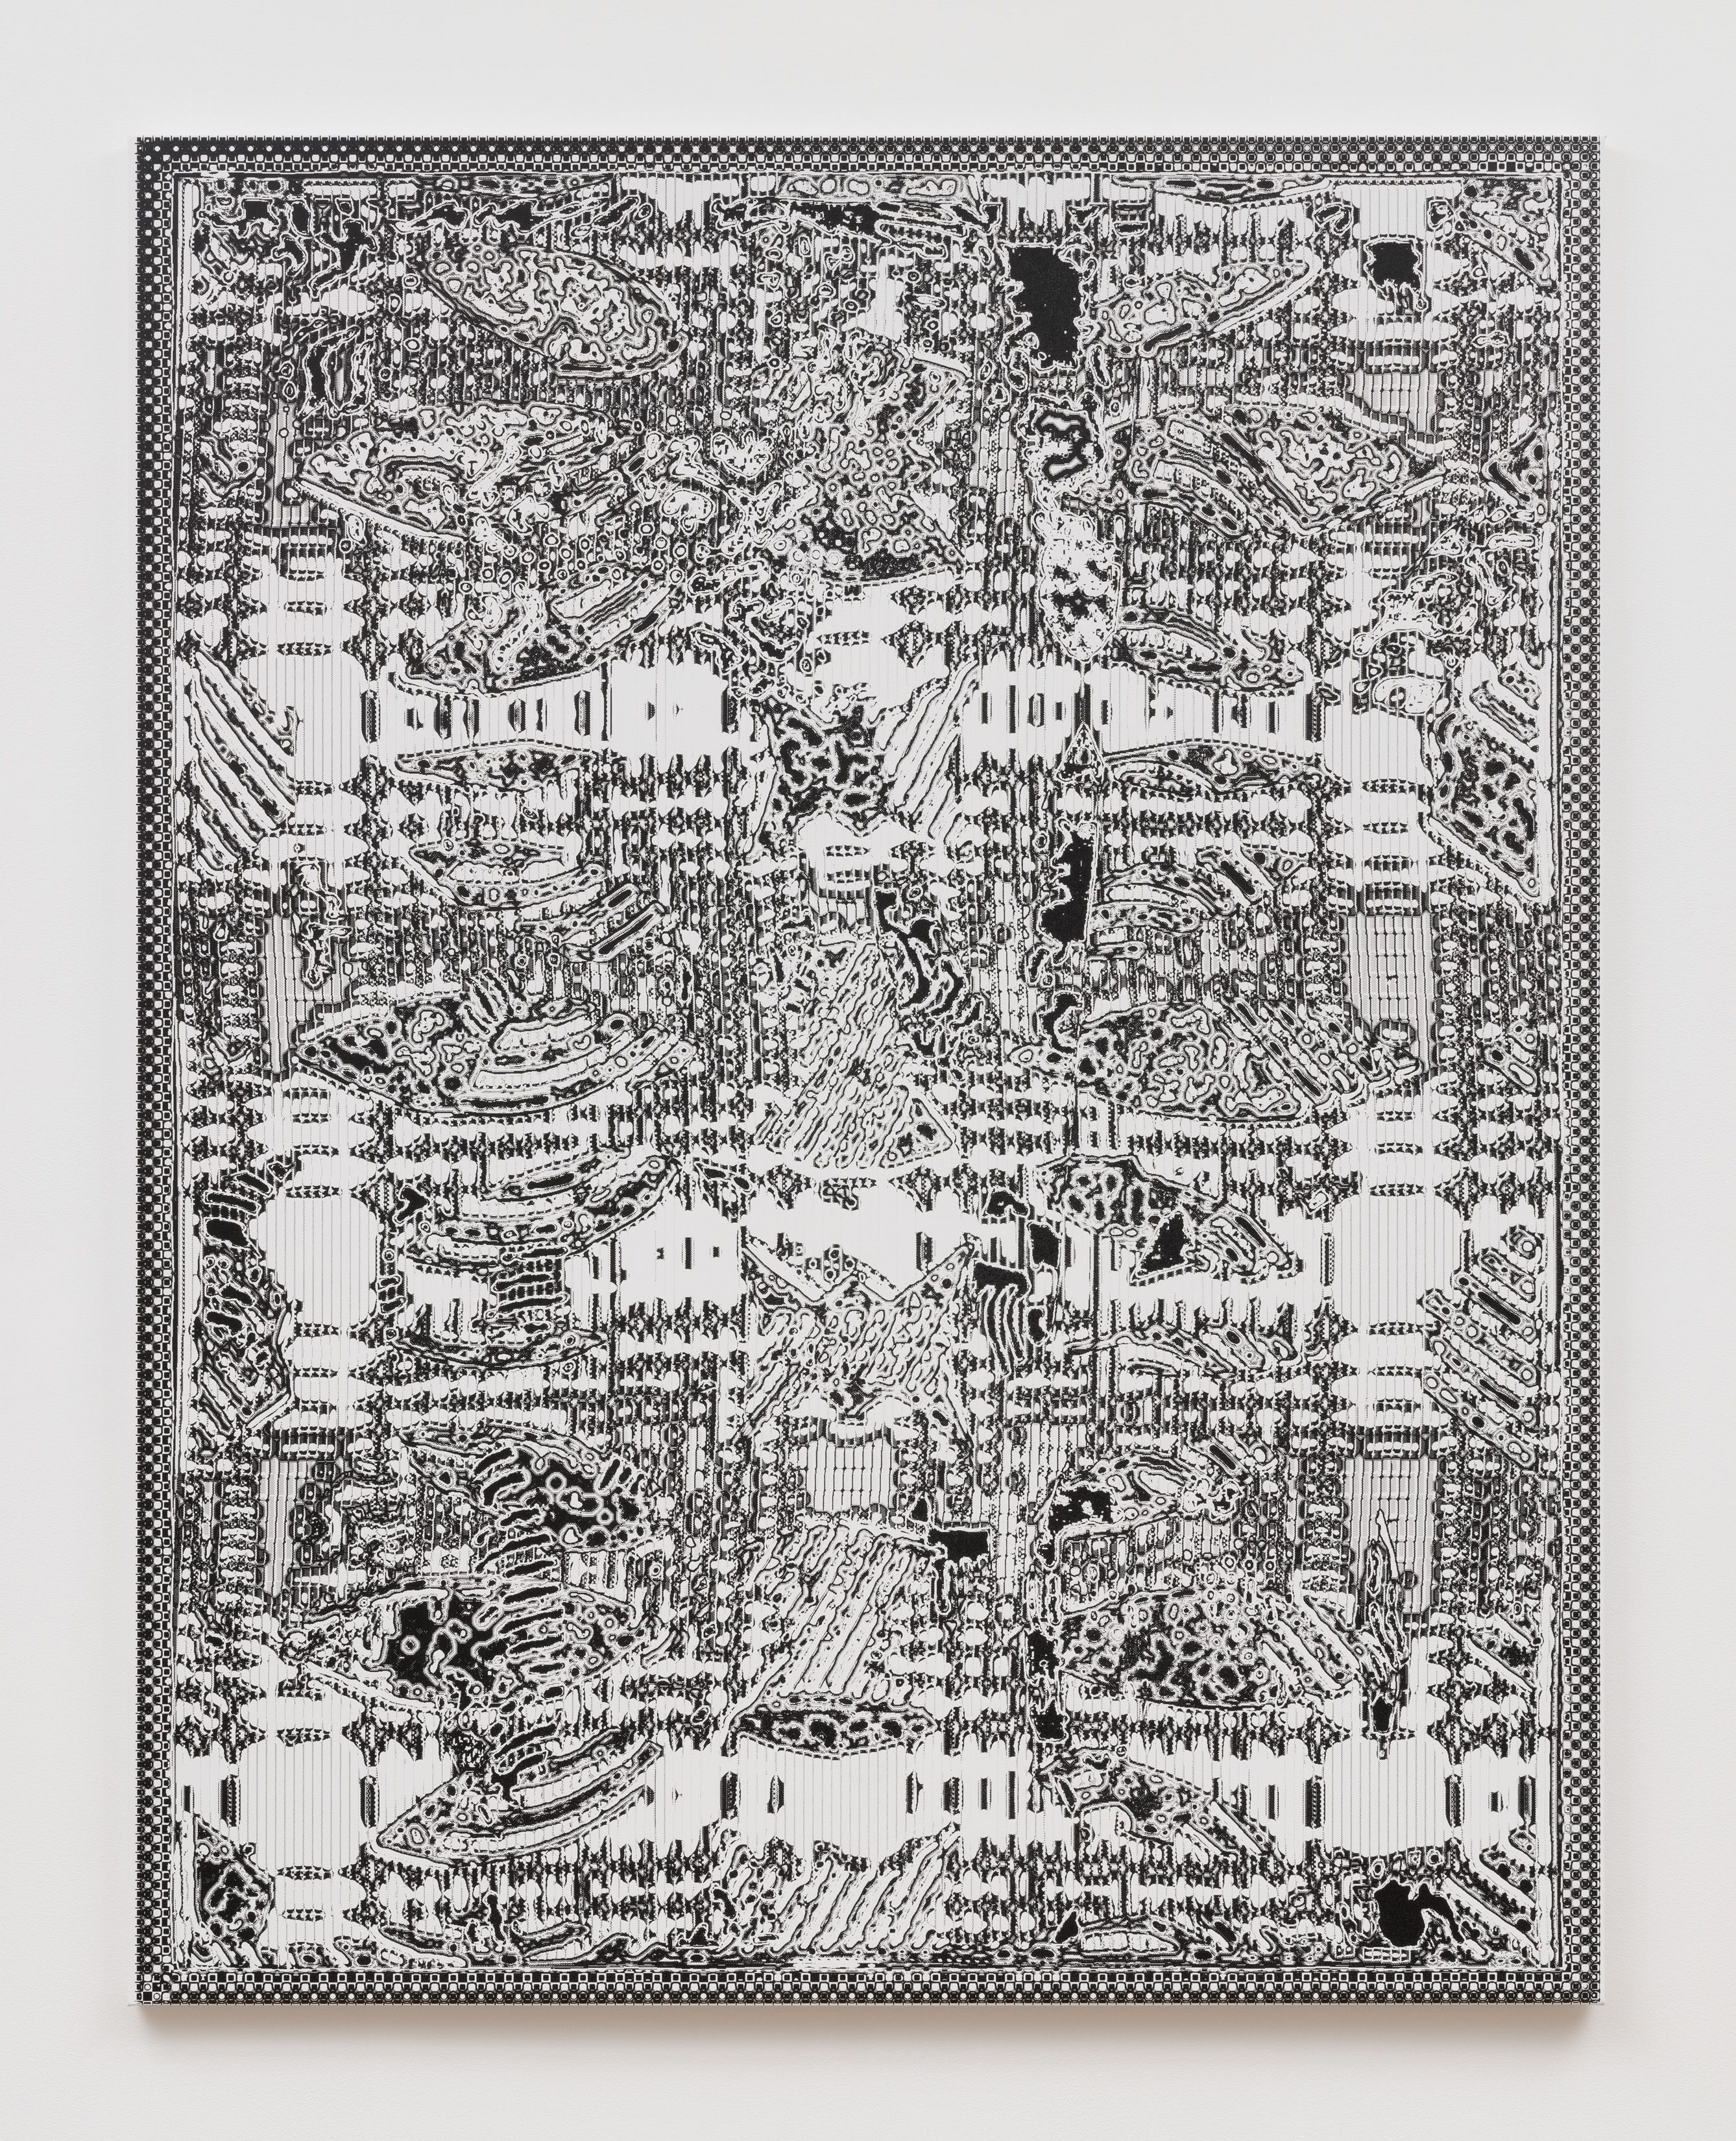 Travess Smalley, Networkbraid, 2023, silkscreen print on canvas, printed at Keigo Prints Inc. with Marginal Editions, New York, NY, 72 x 60 in. (183 x 152.4 cm.)